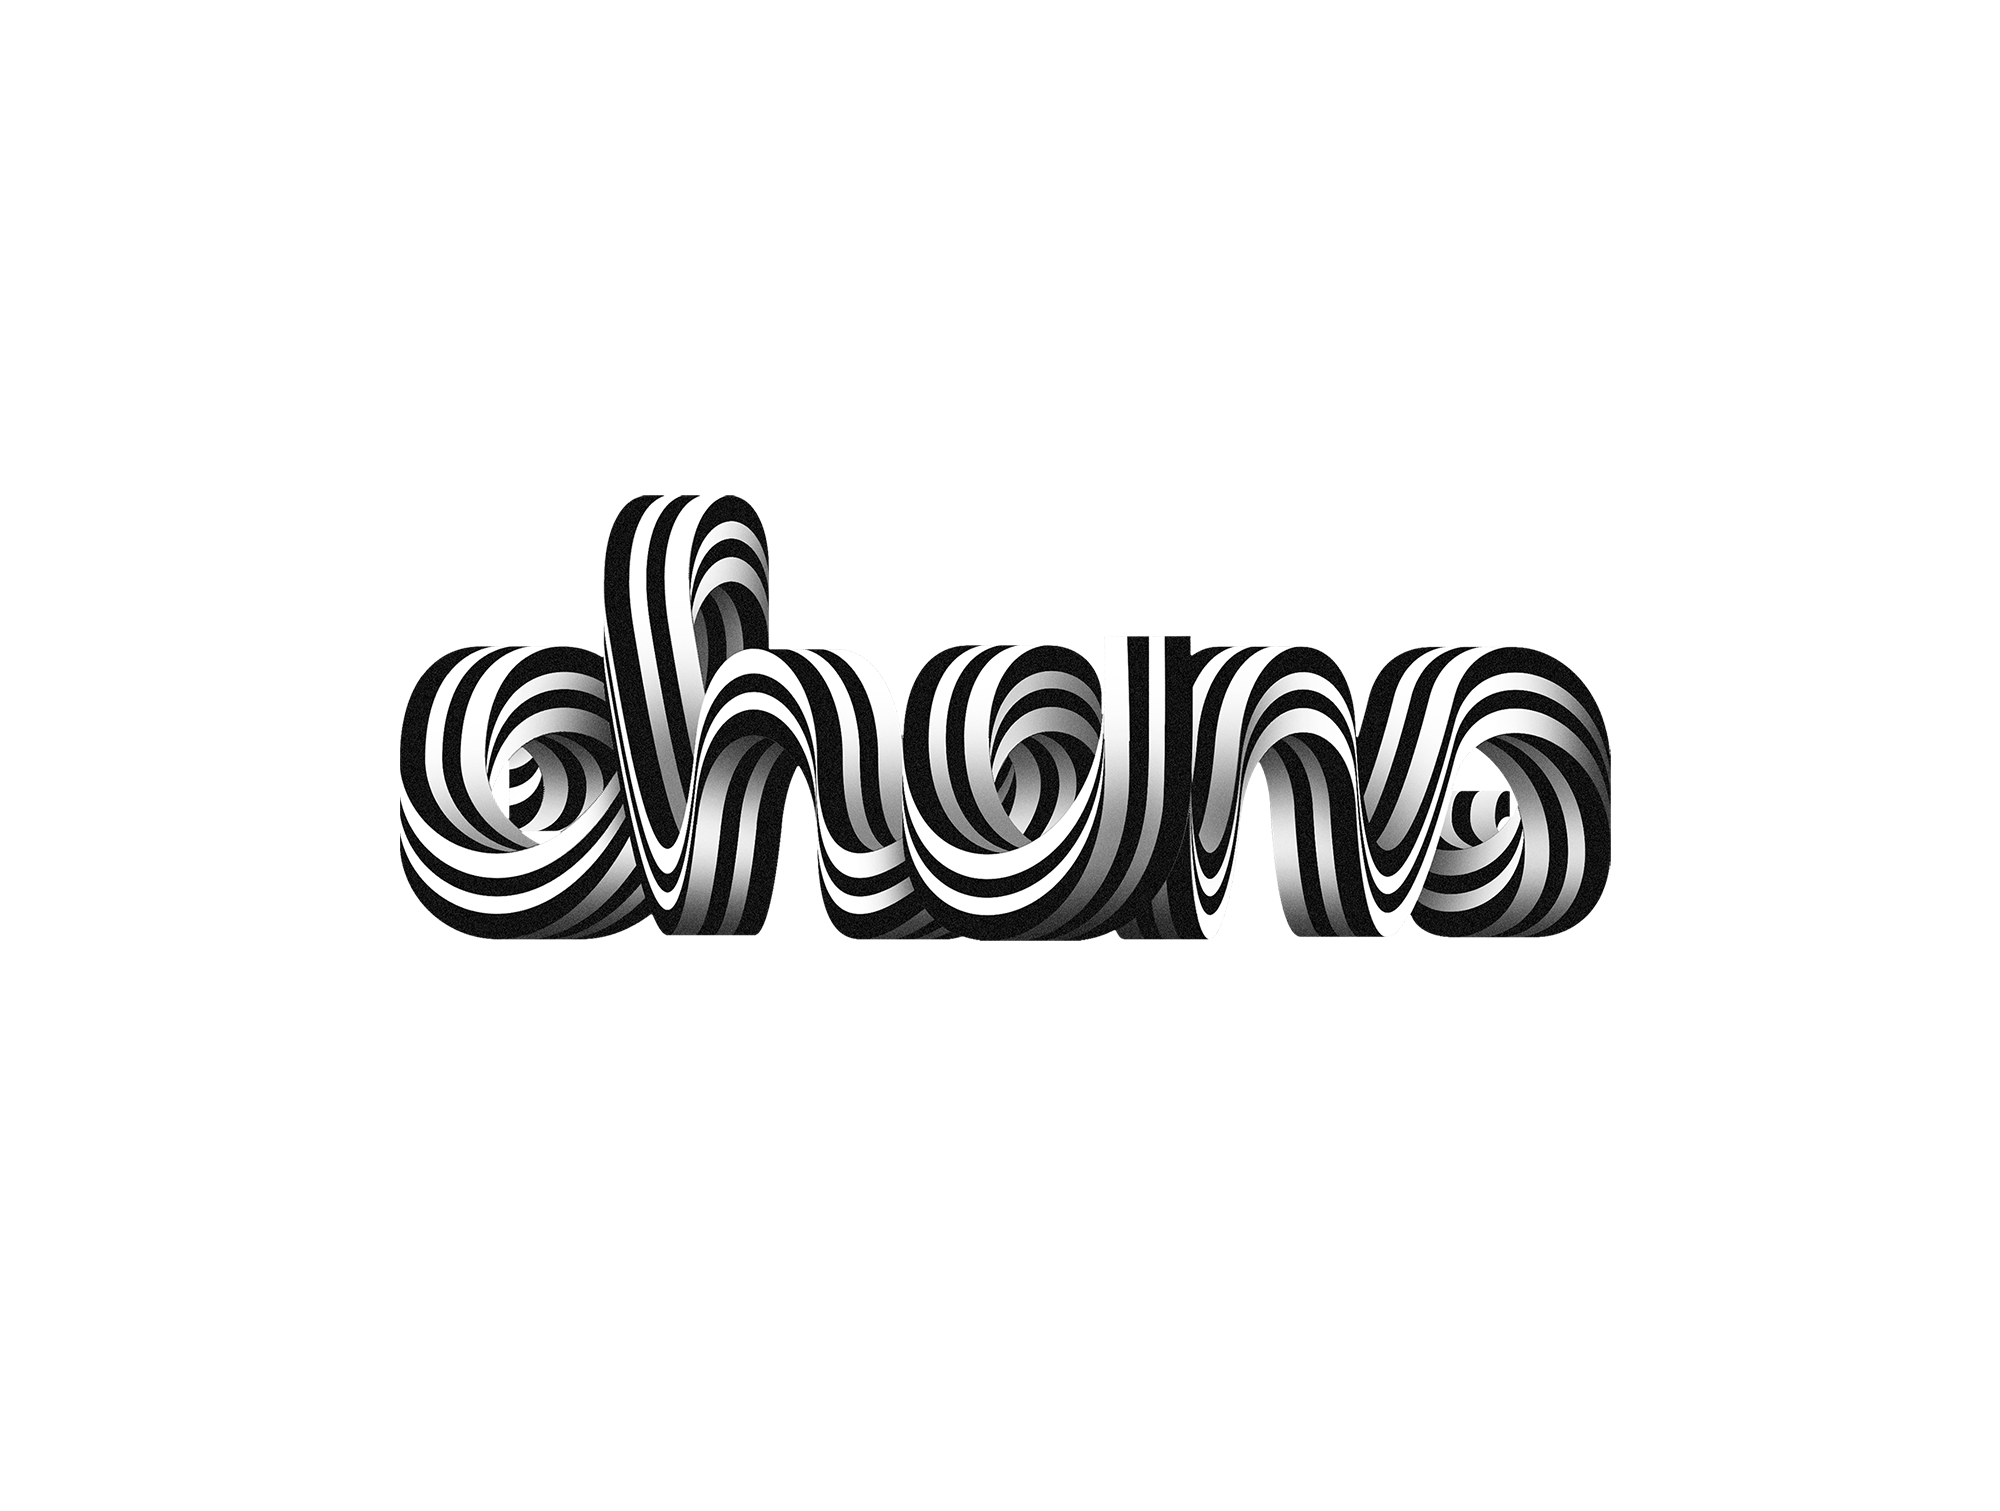 Chens OP art logo made with Illustrator